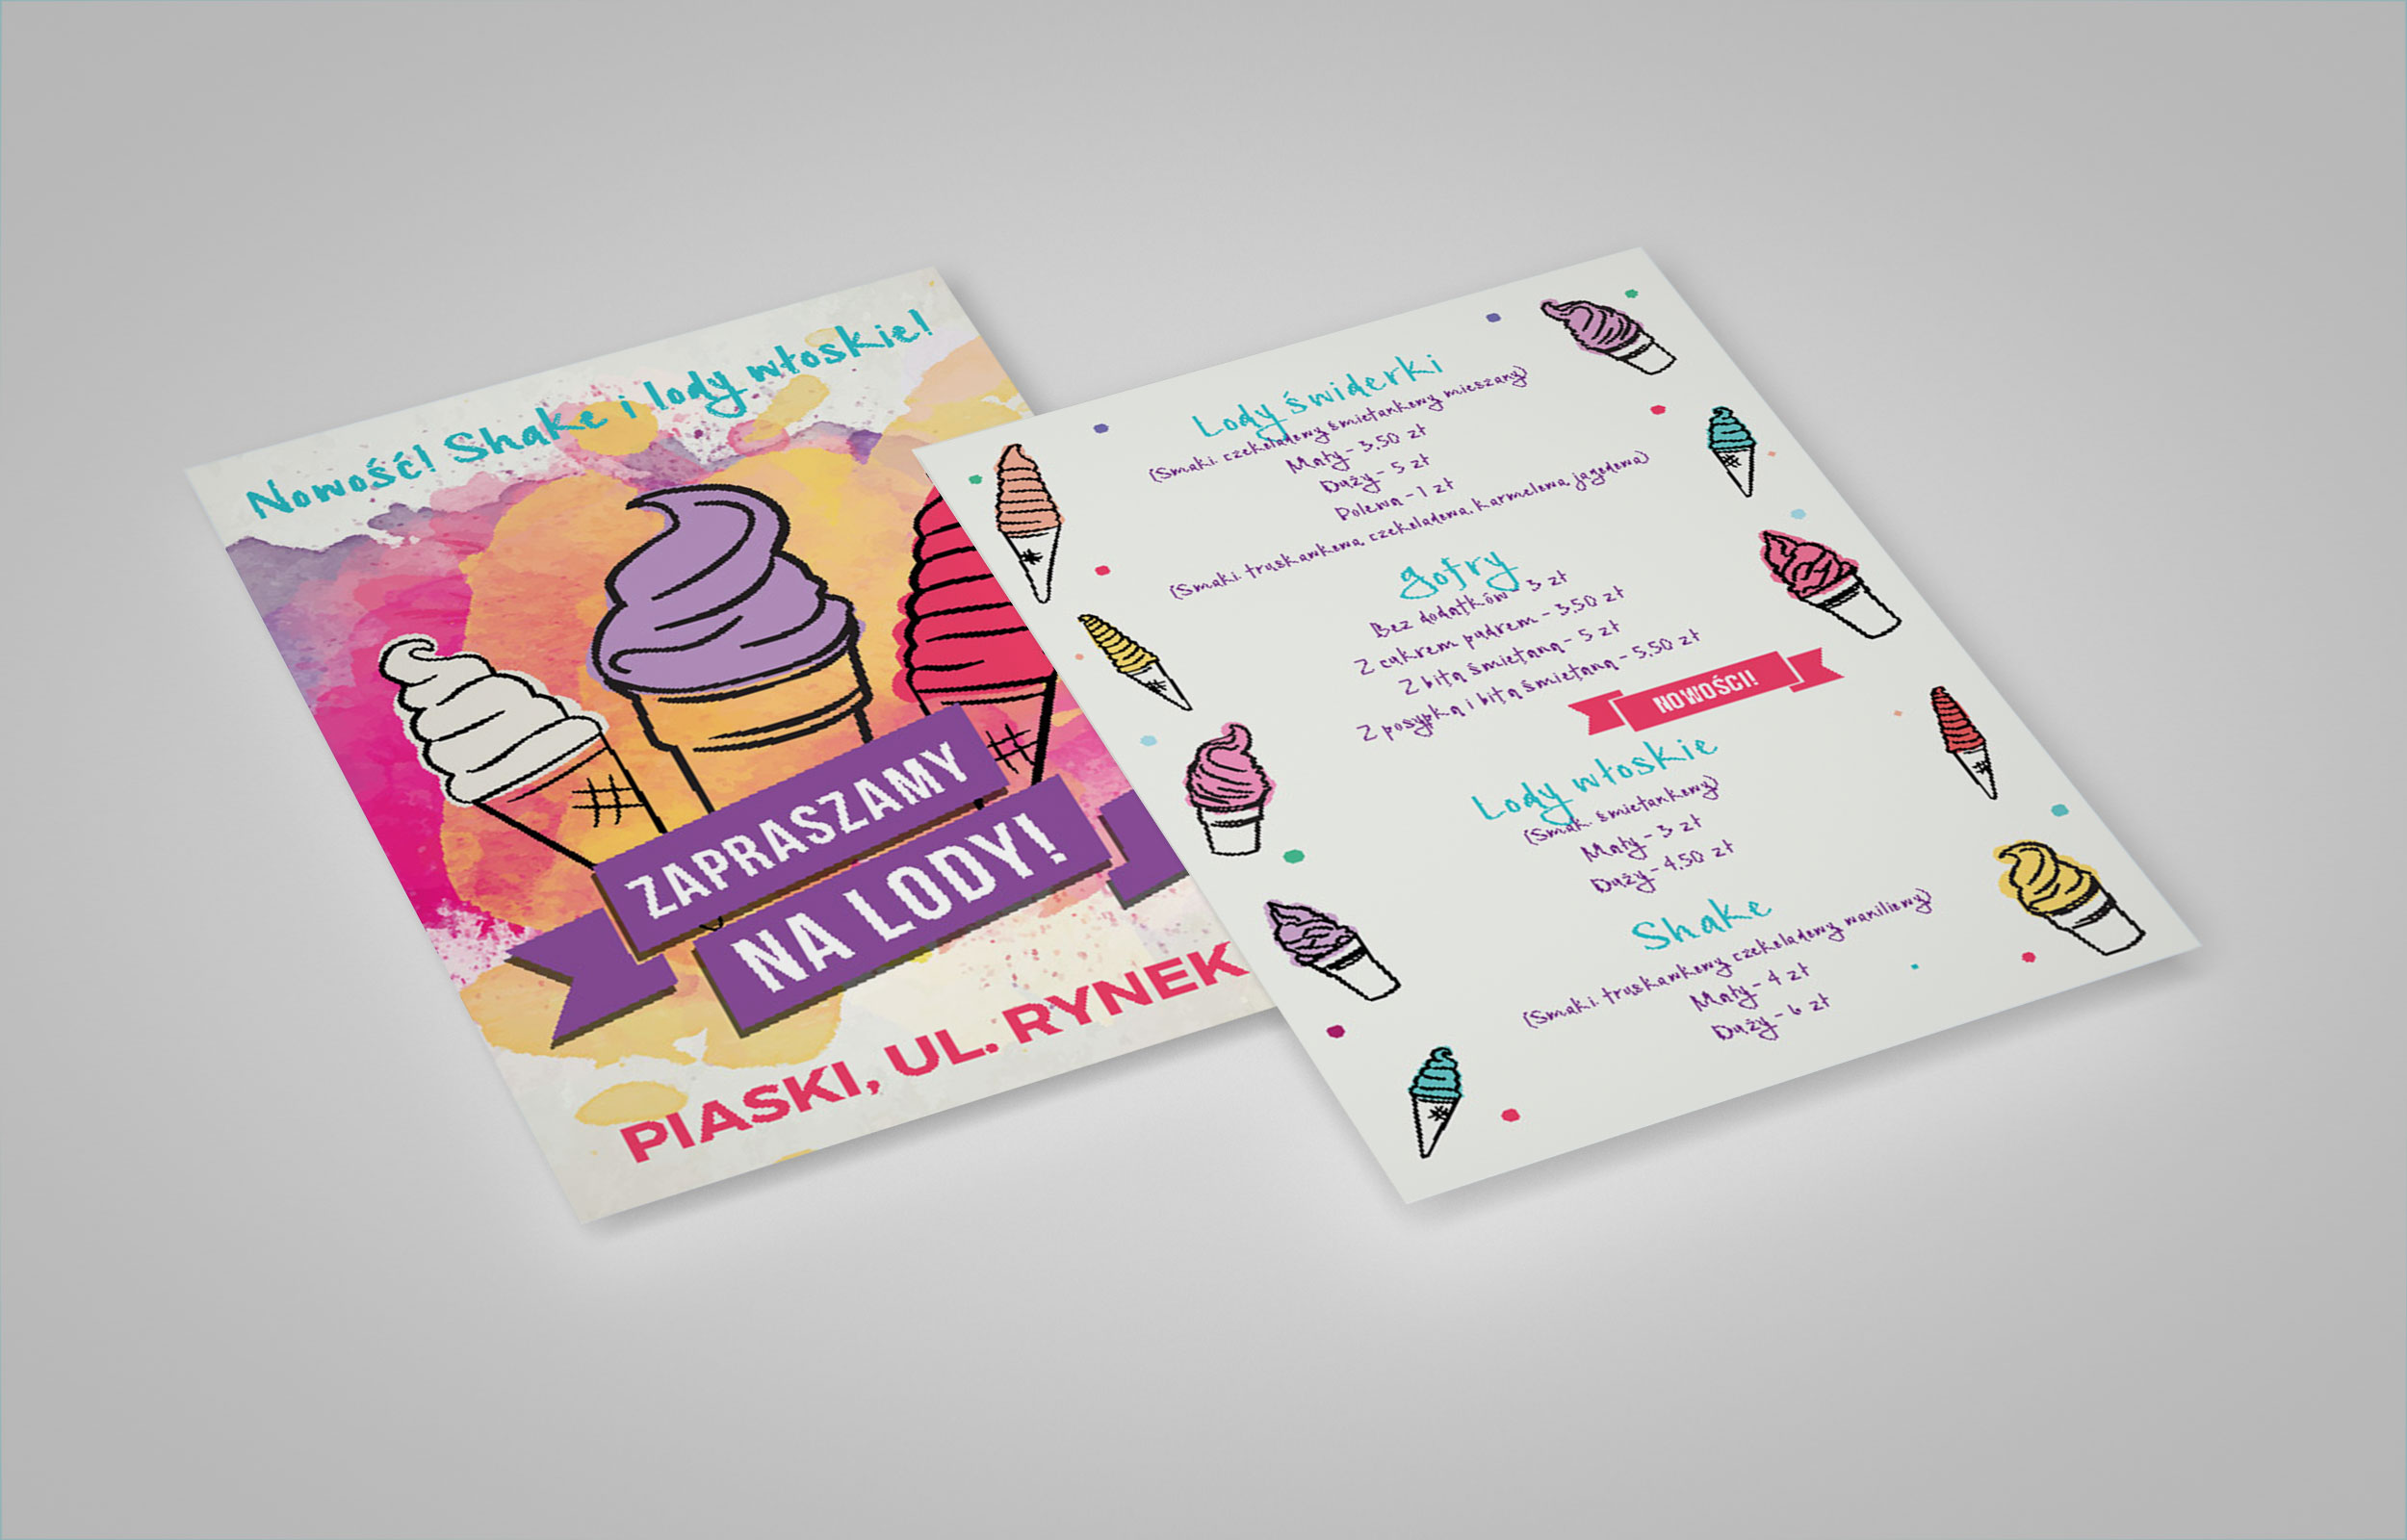 Designing leaflets for the ice-cream parlour